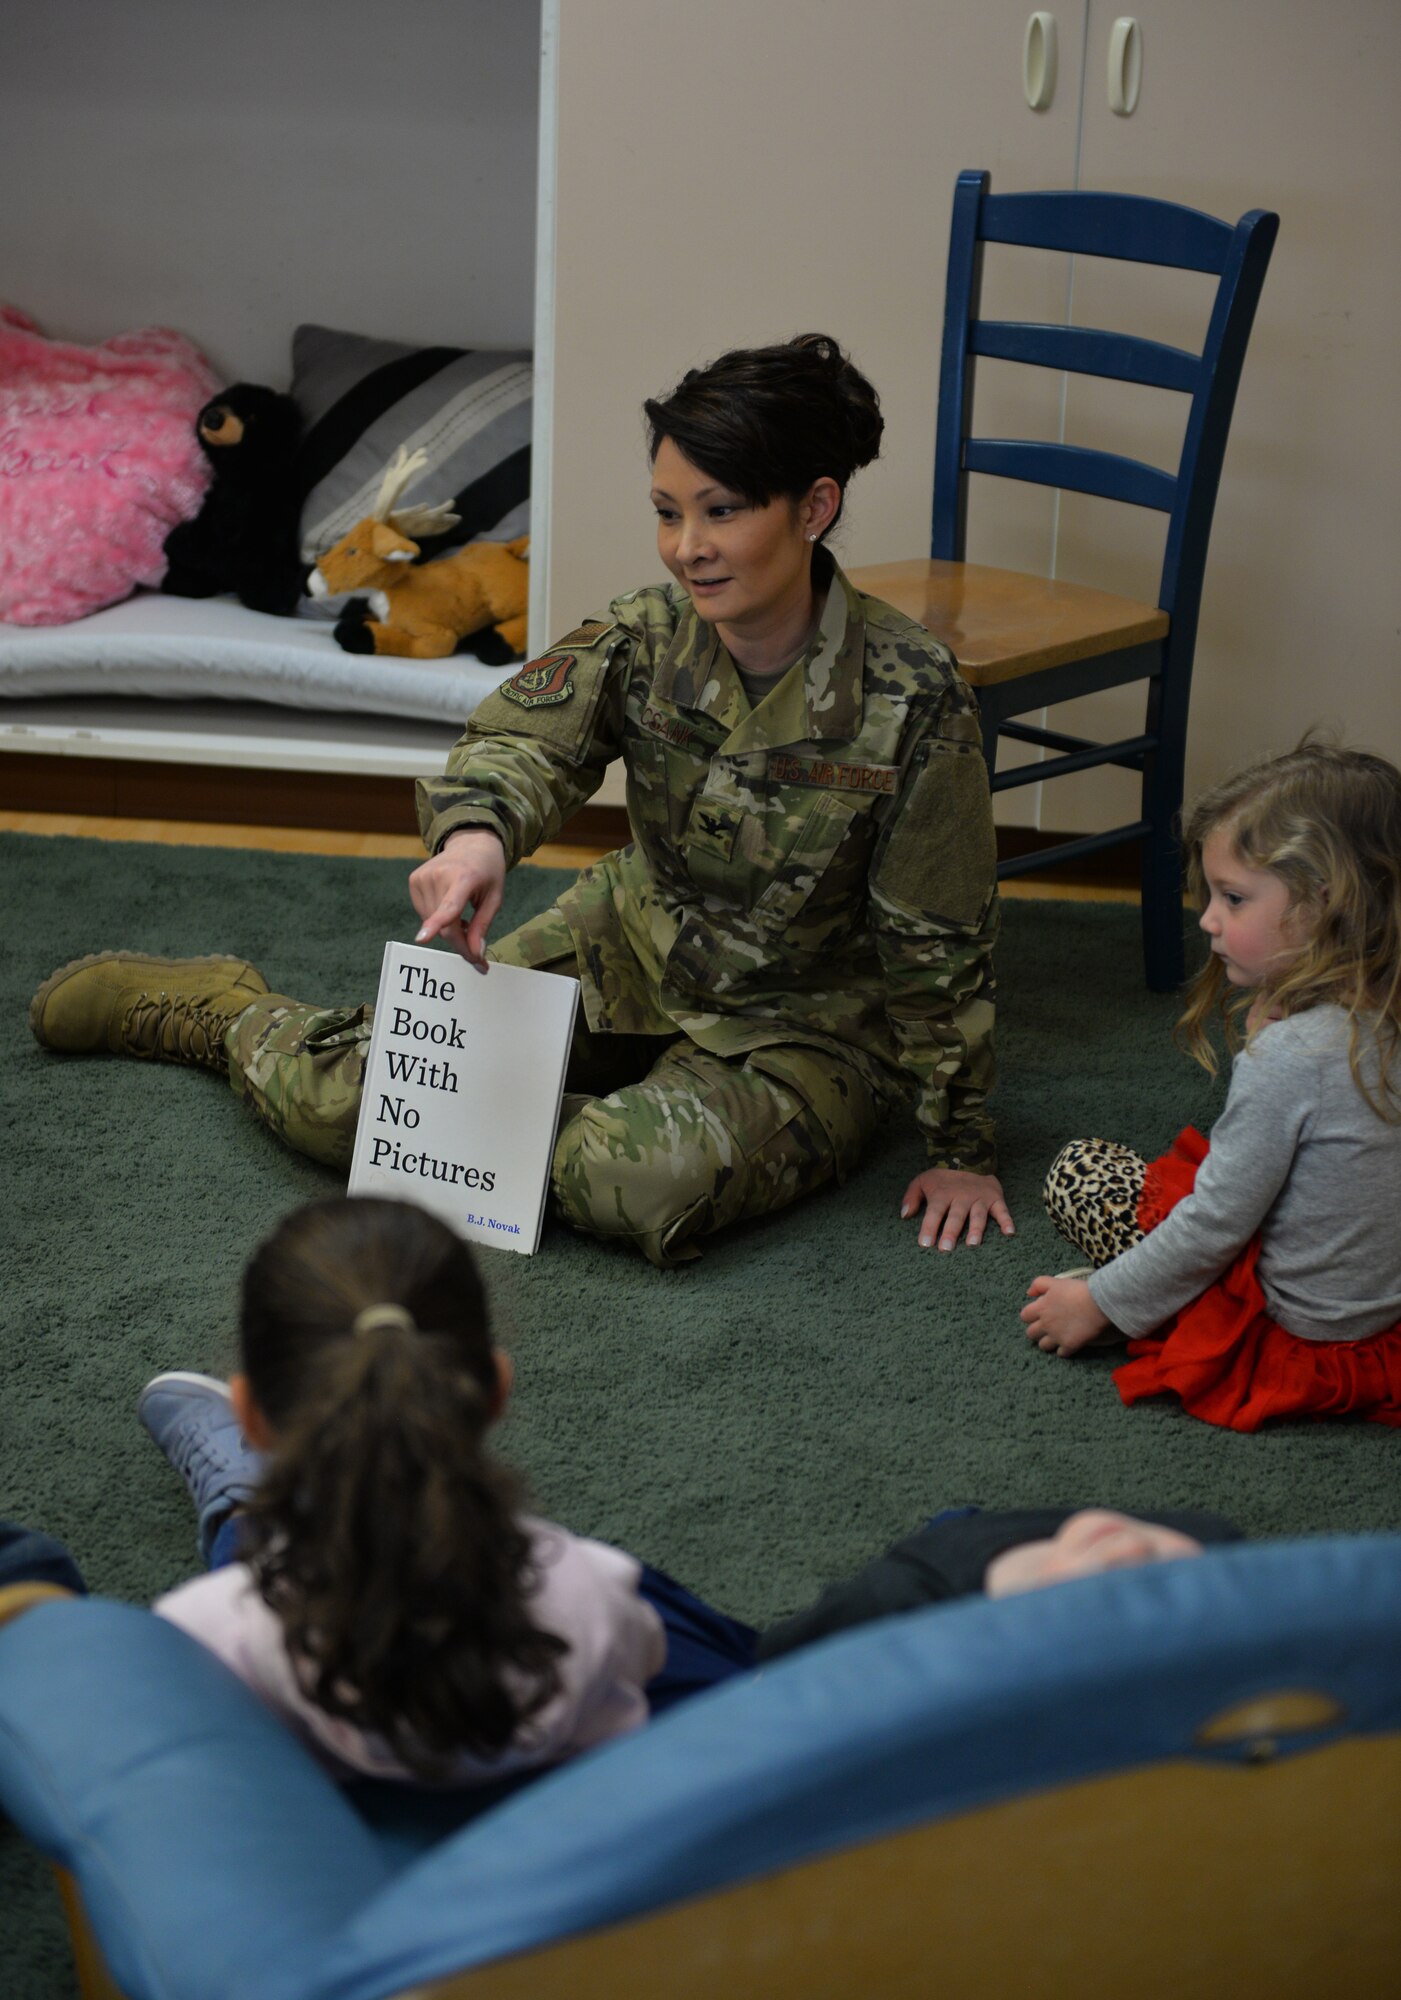 U.S. Air Force Col. Patricia Csànk, Joint Base Elmendorf-Richardson and 673d Air Base Wing commander, interacts with kids at the Denali Child Development Center, JBER, Alaska, April 8, 2019. In honor of Month of the Military Child, Csànk visited the Denali Child Development Center at JBER to read to some of the children. Out the selection of four books, the kids elected to read “The Book With No Pictures,” by B.J. Novak, knowing all too well what this piece of literature would have Csànk reading aloud.